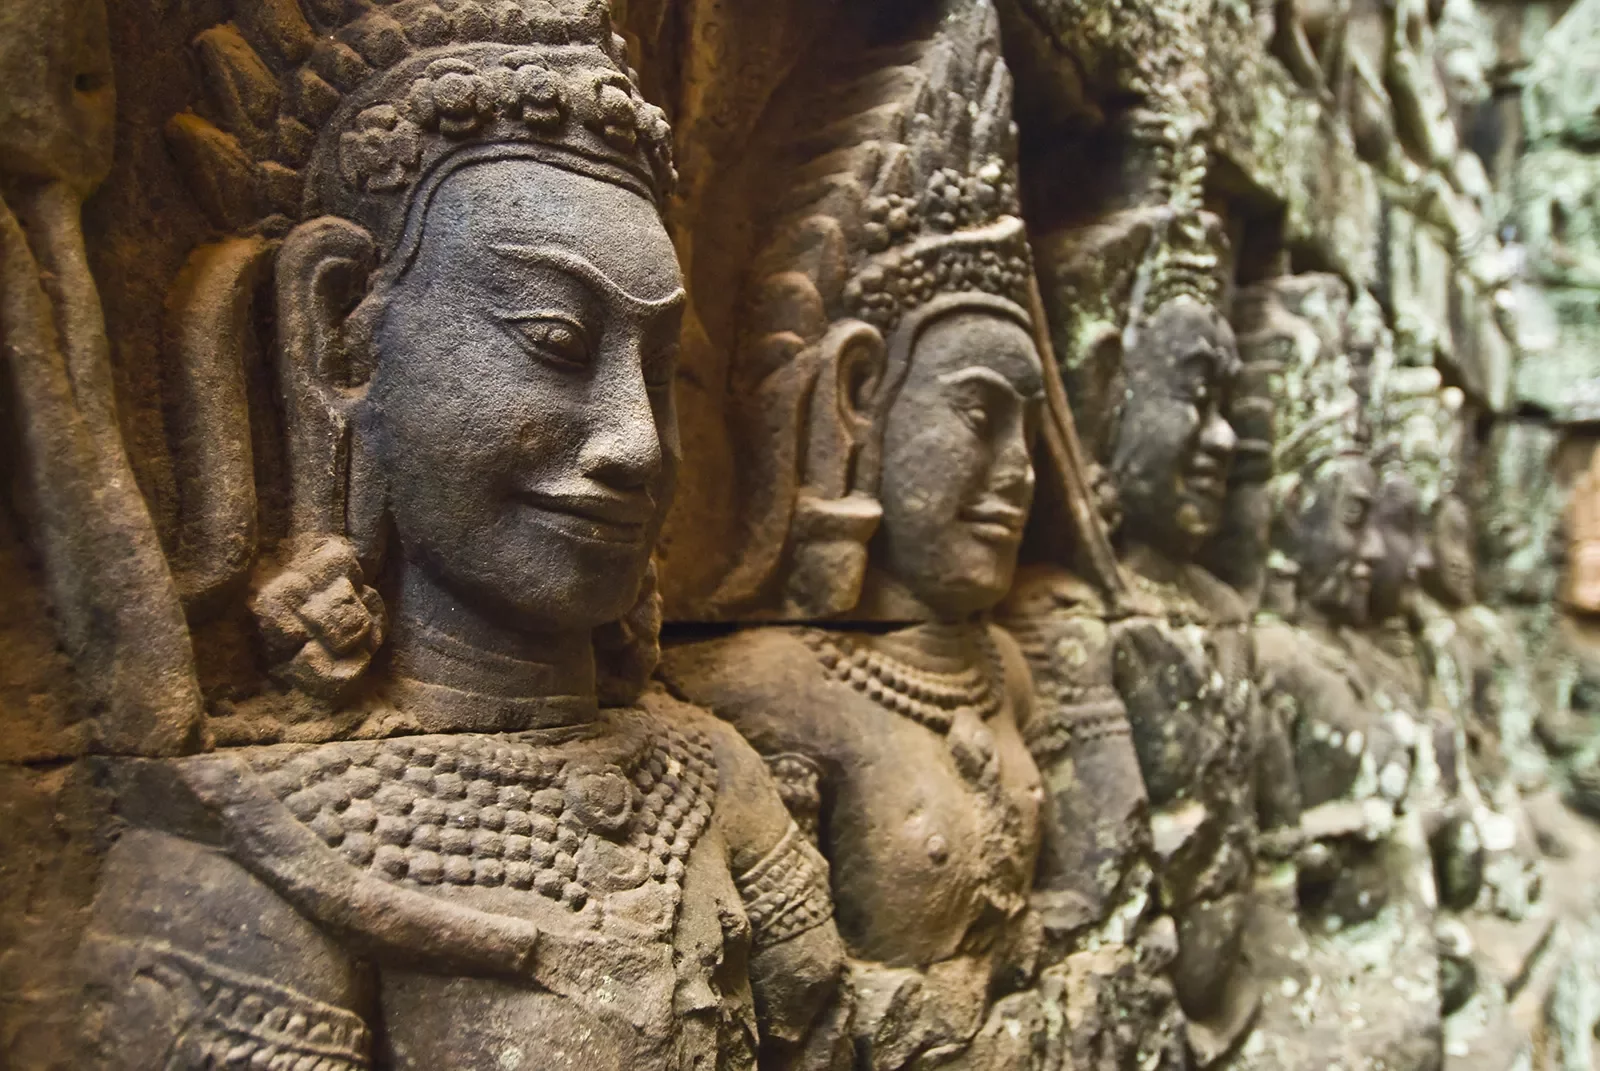 Carved stone statues in Vietnam